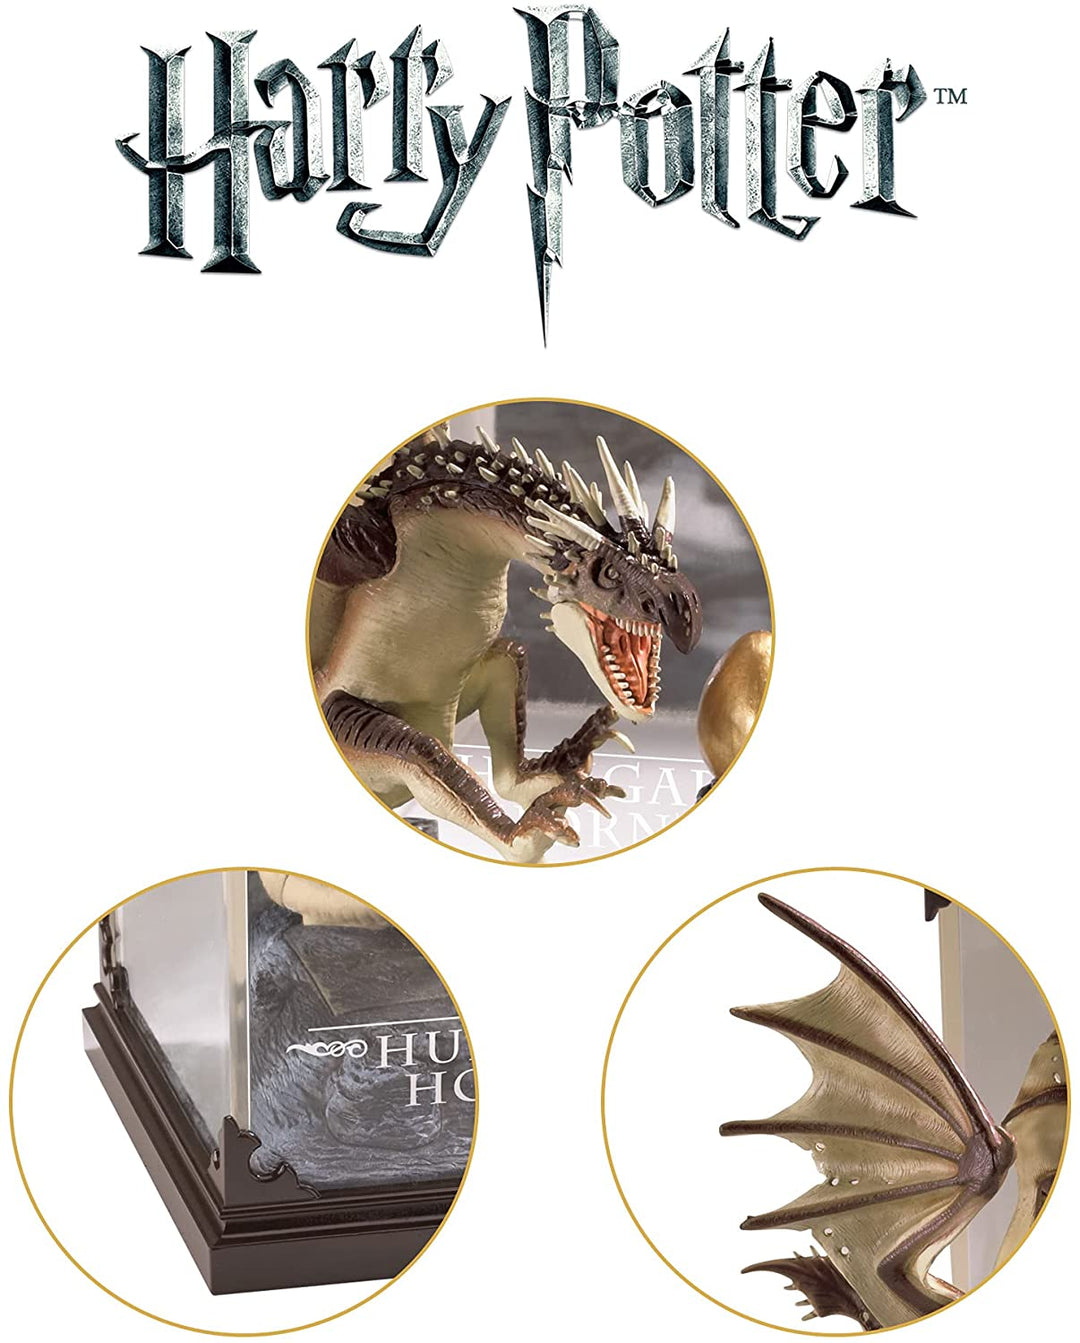 Wizarding World Collection : Magical Creatures – Hungarian Horntail